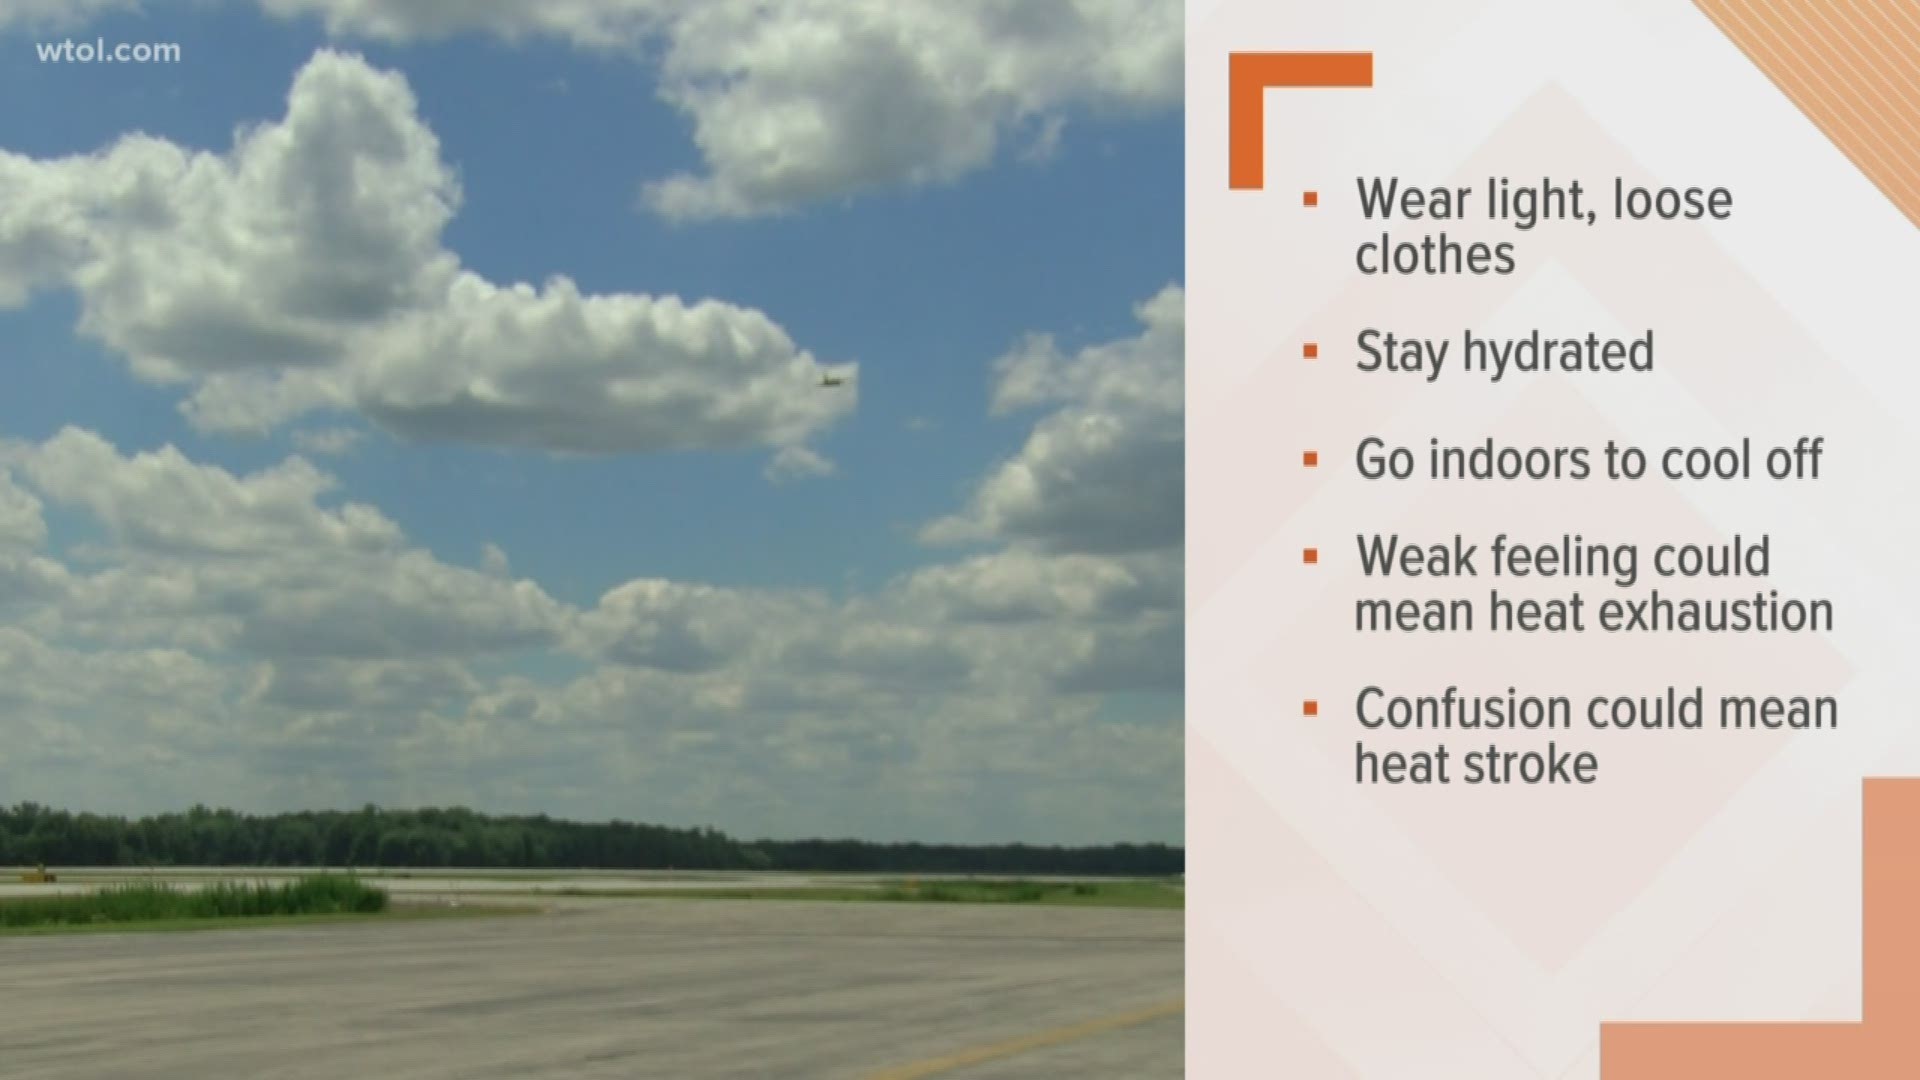 Learn the difference between heat stroke and heat exhaustion, and find ways to cool down quickly.